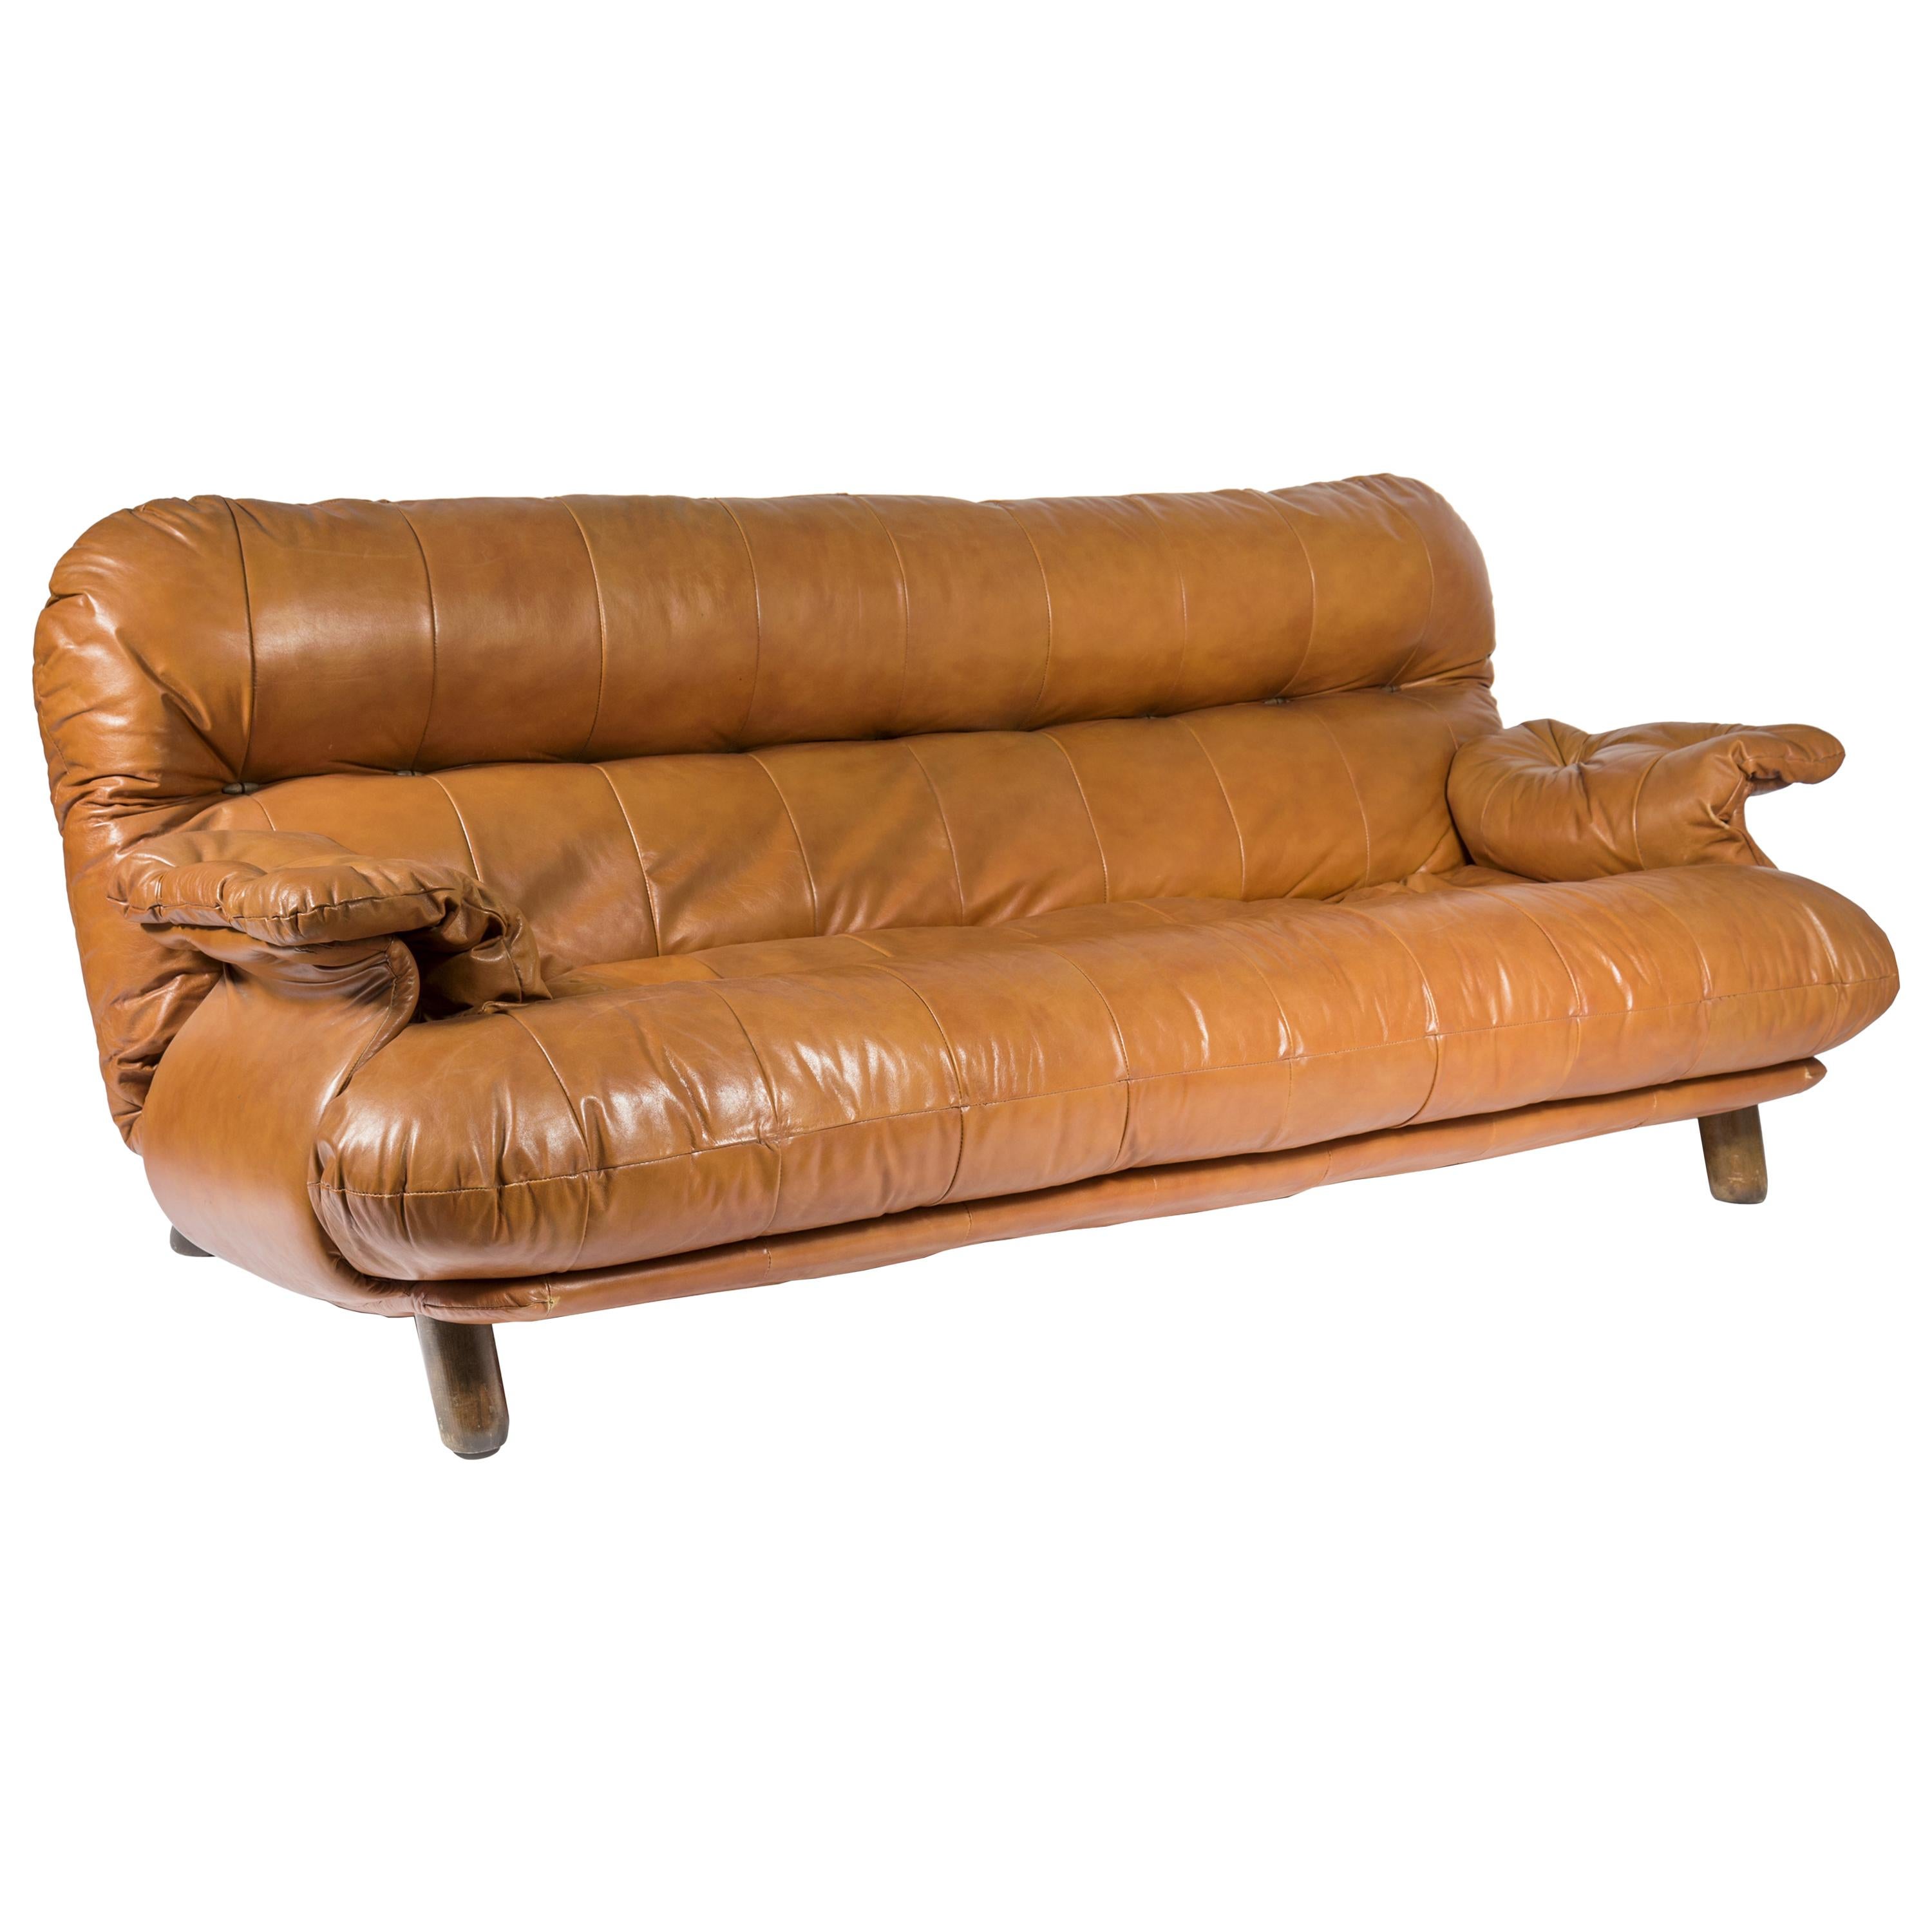 Sofa in Cognac Leather and Wood